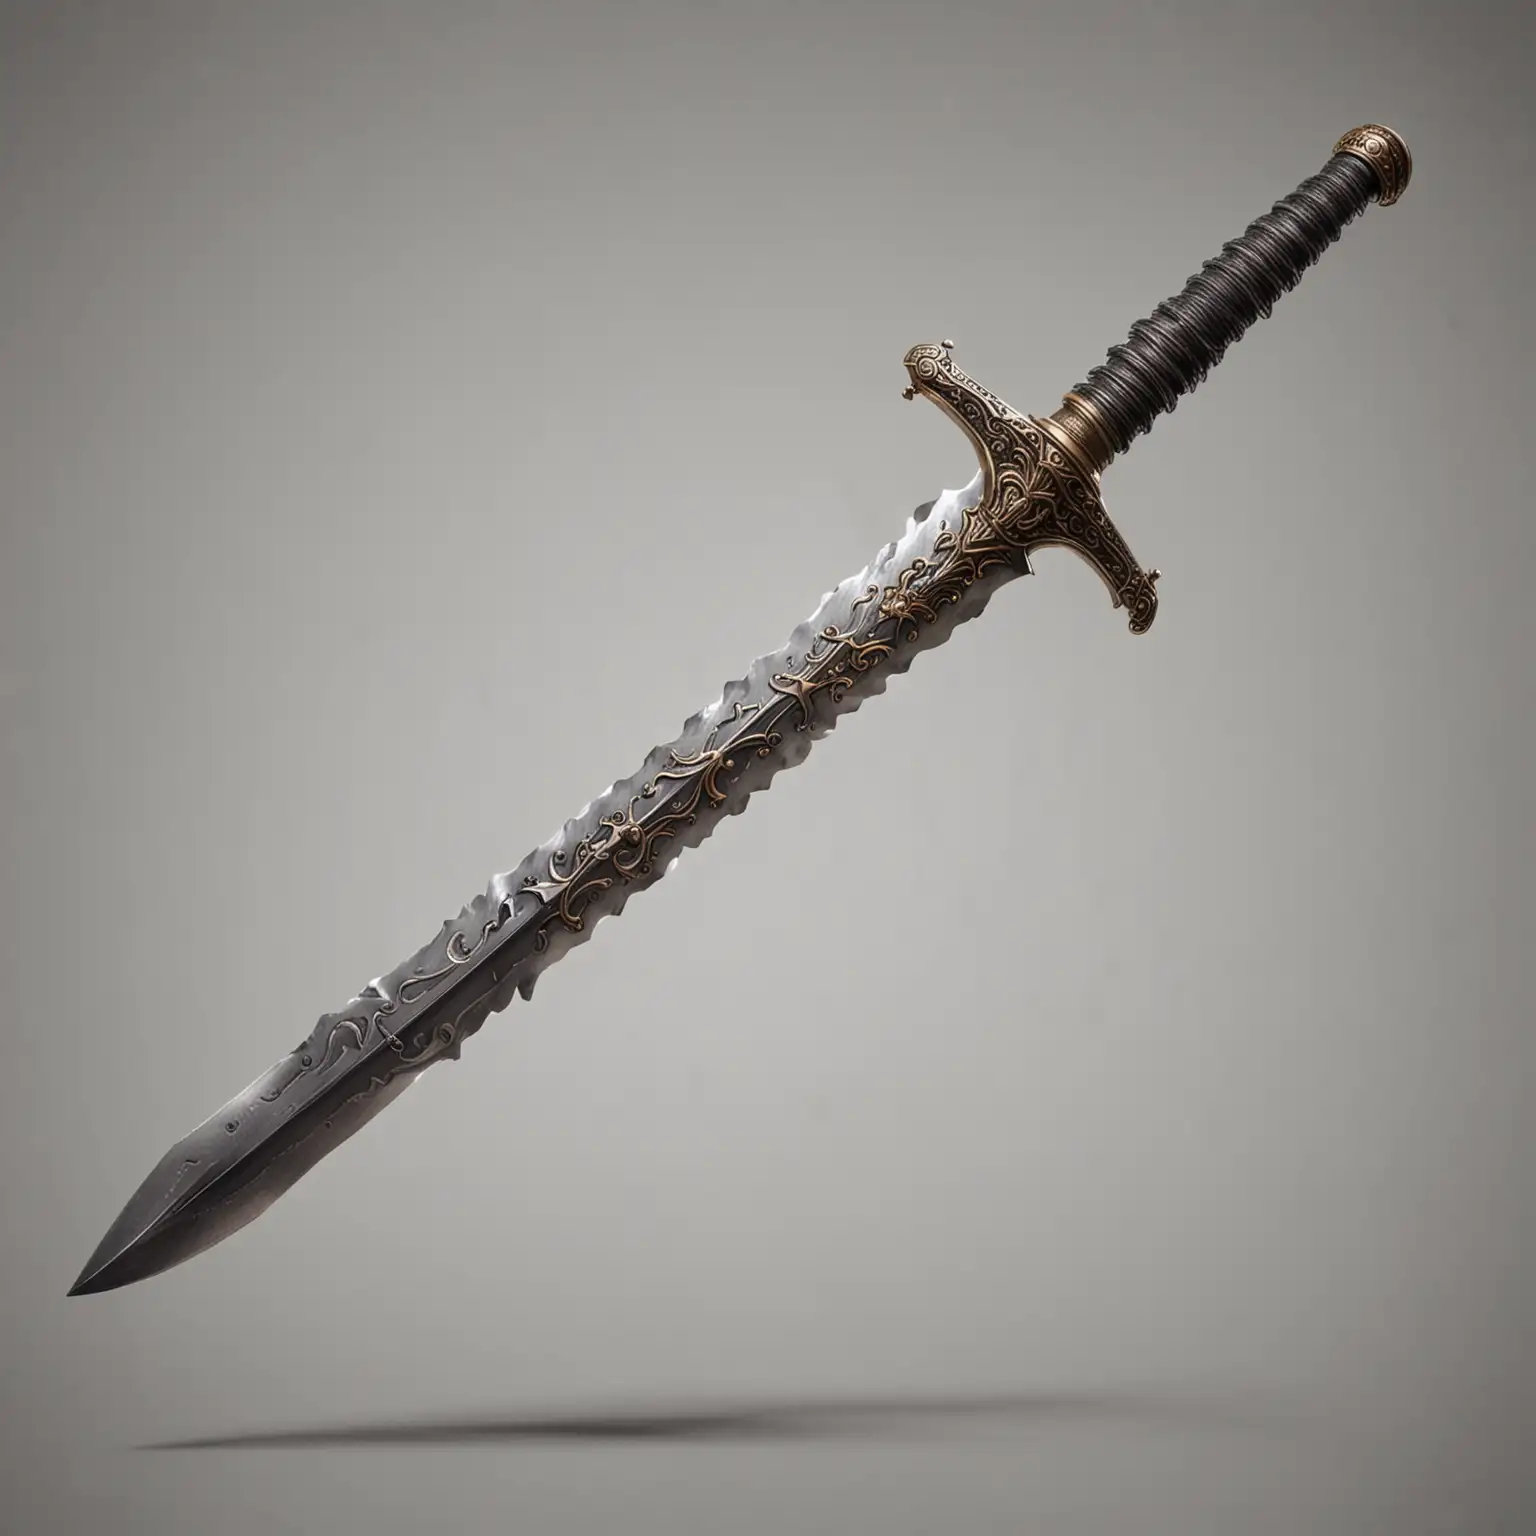 Realistic Sword with Small Hilt Hovering